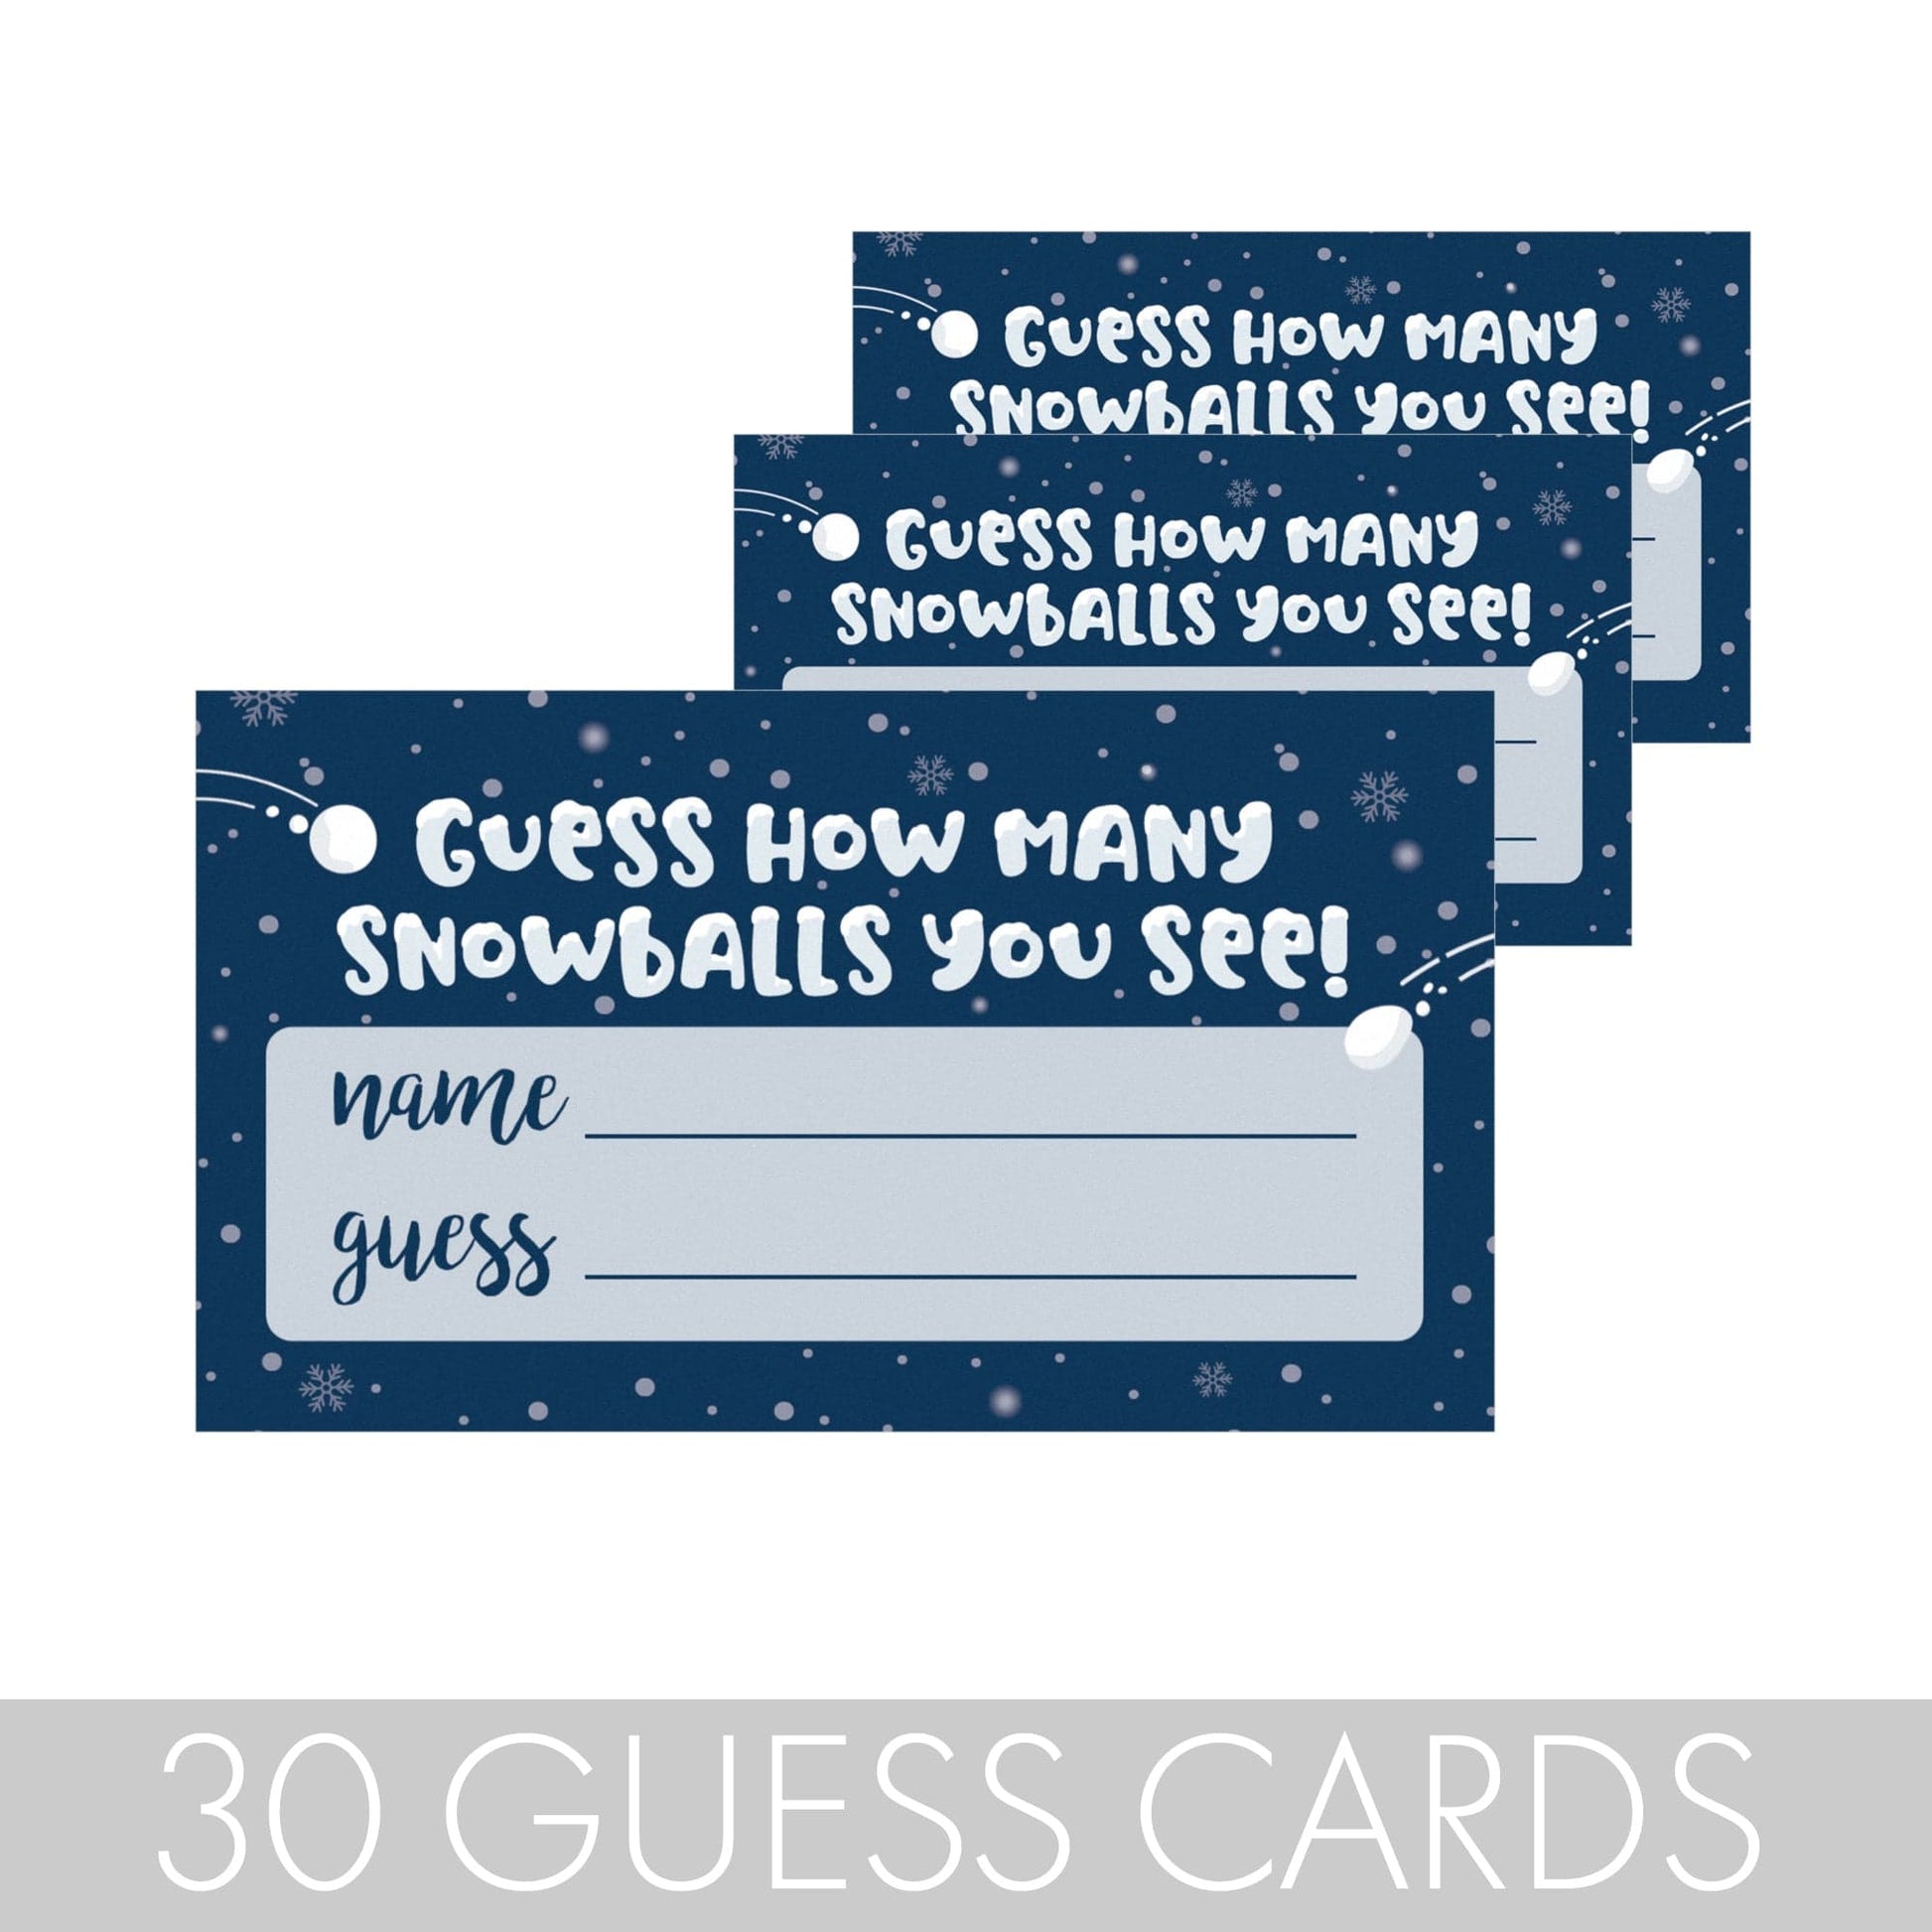 Winter Holiday Party Games - How Many Snowballs Holiday Guessing Game